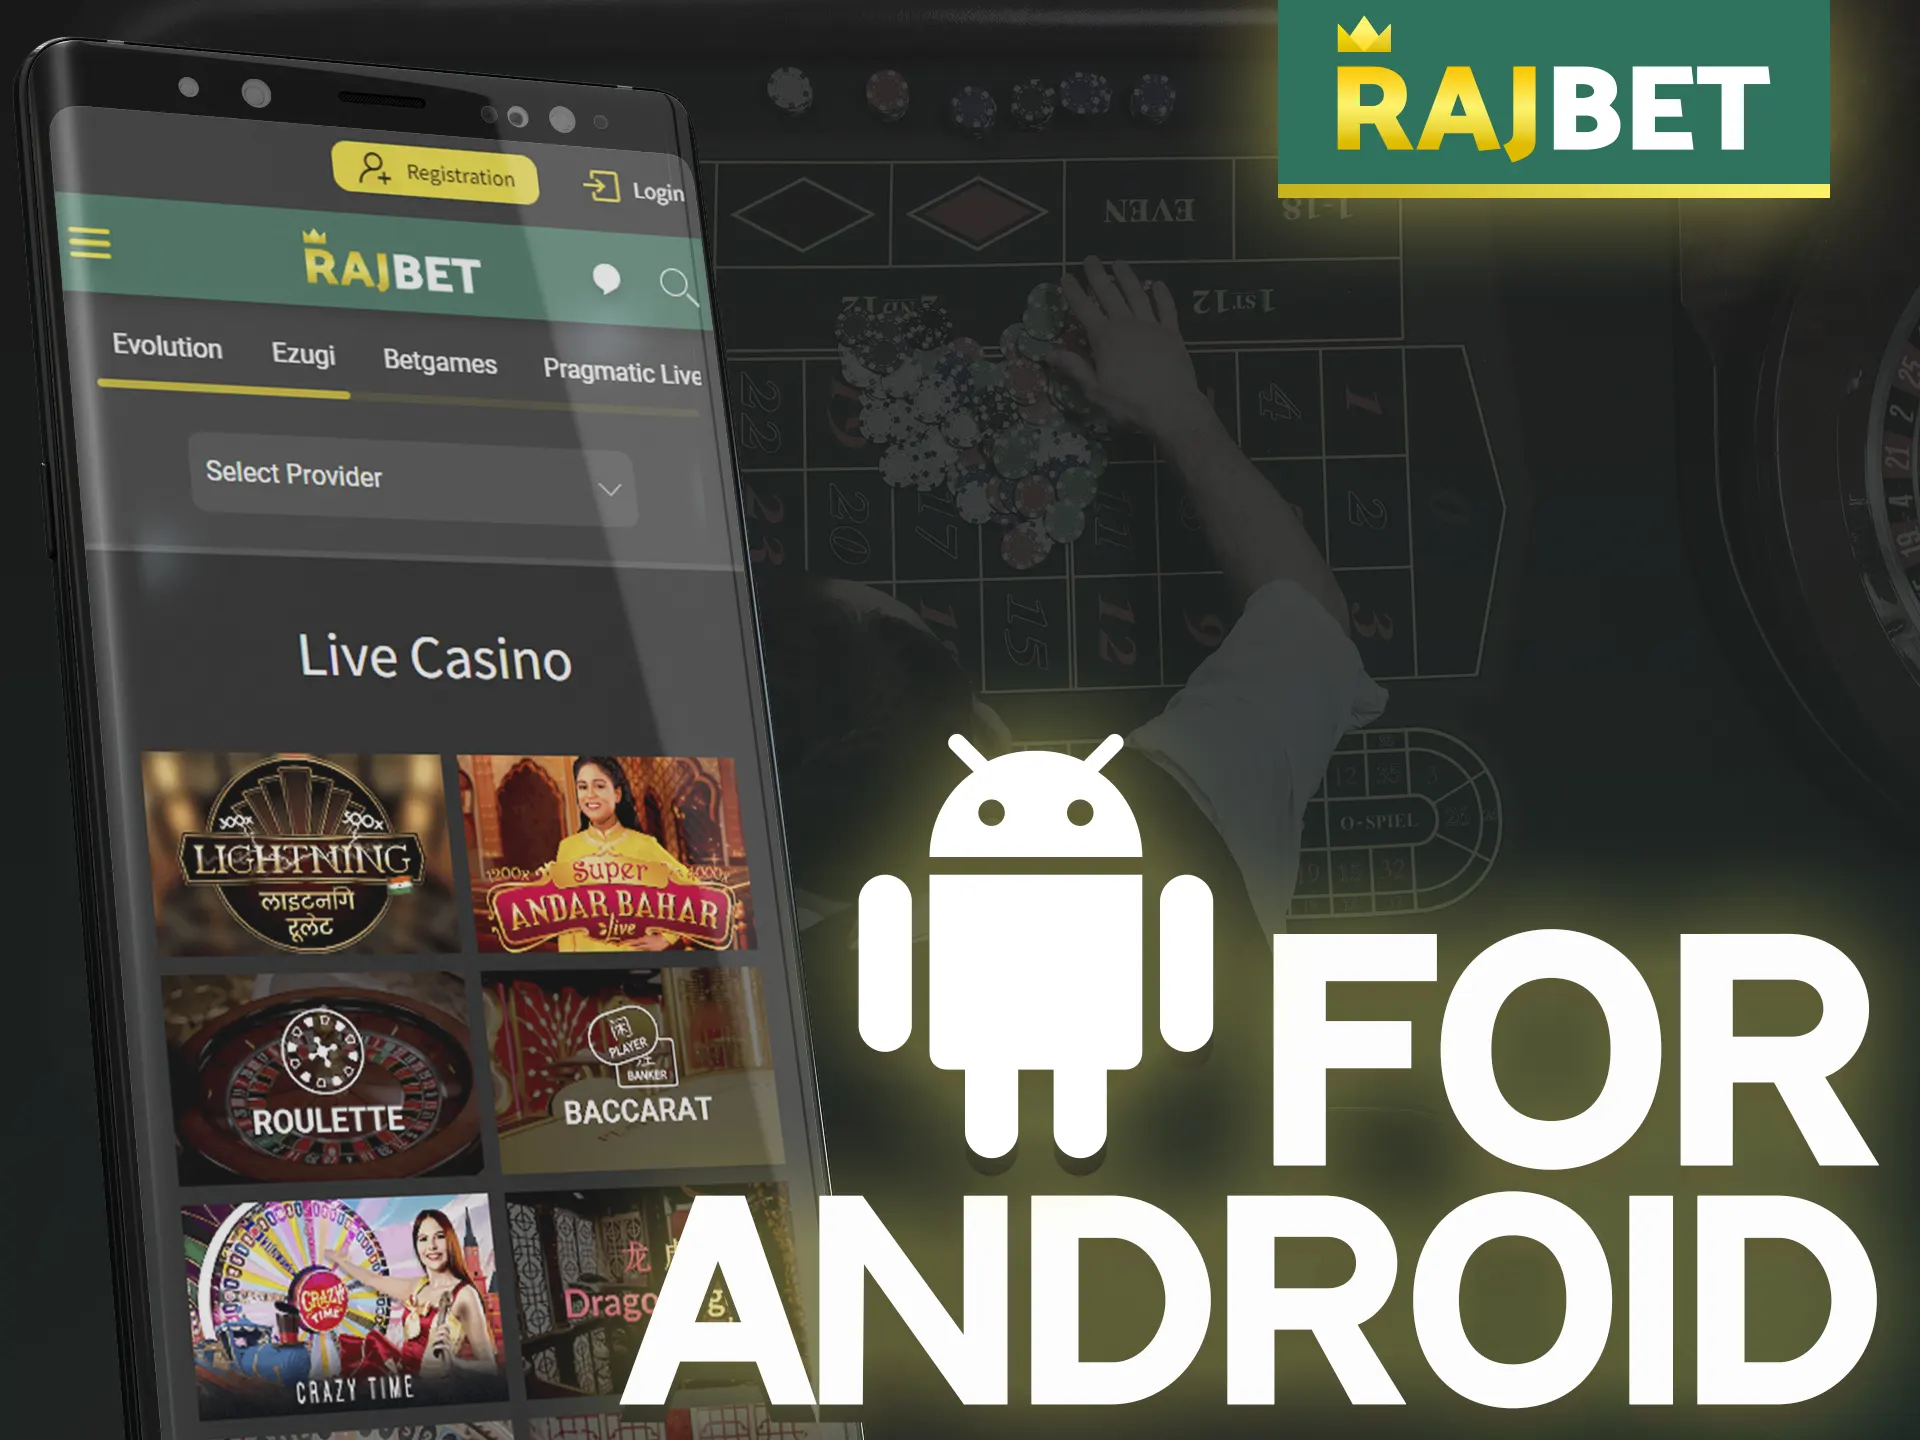 Play at Rajbet online casino from your Android device.